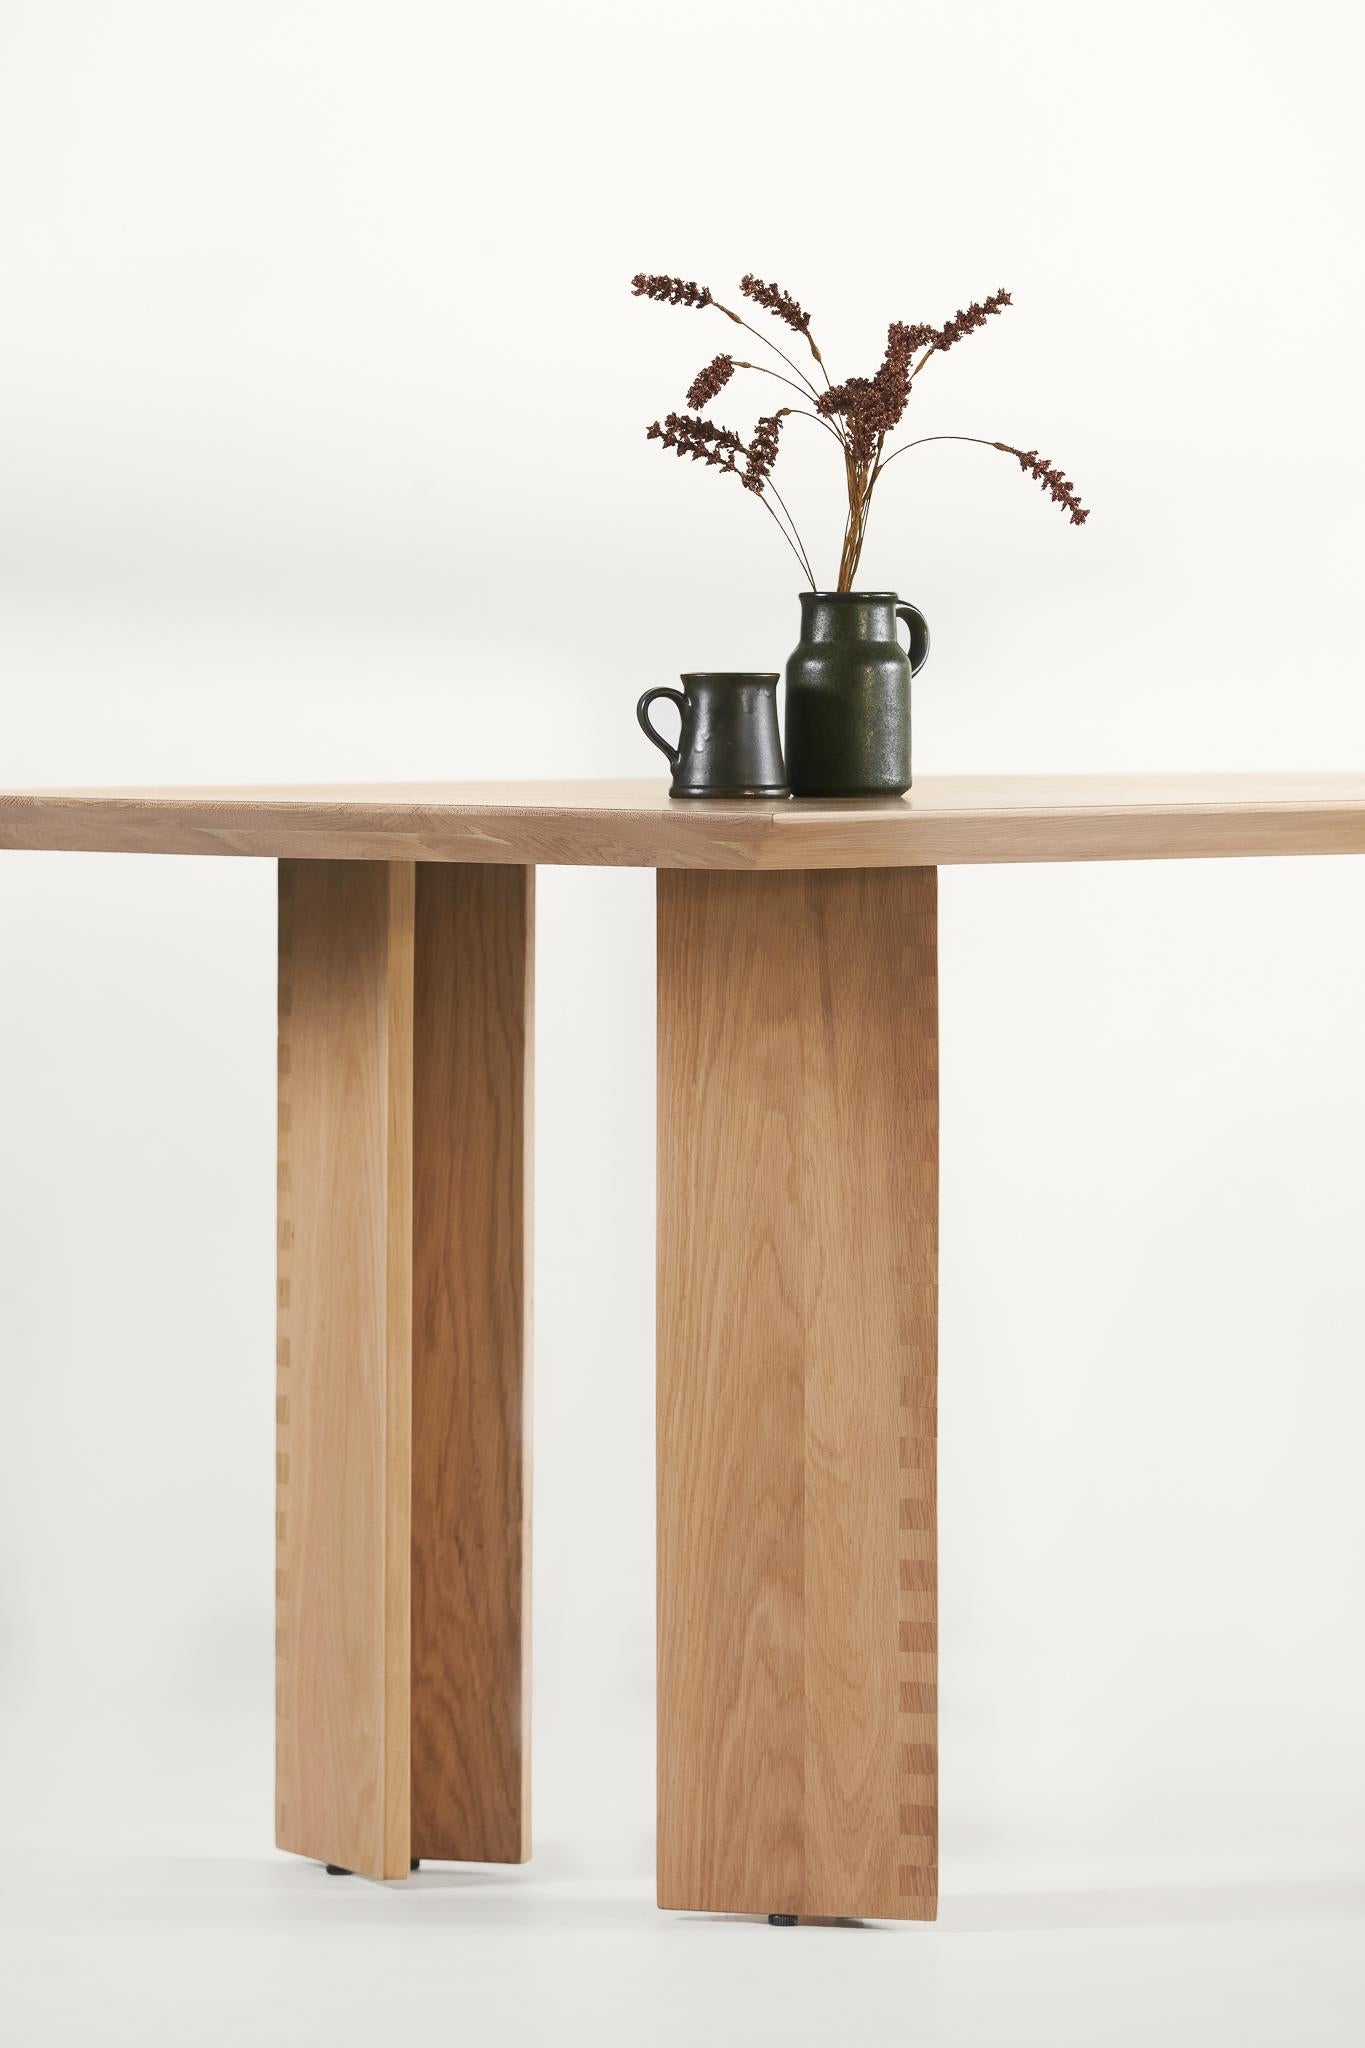 Romanian Angus Table by Arbore x Studio PHAT For Sale